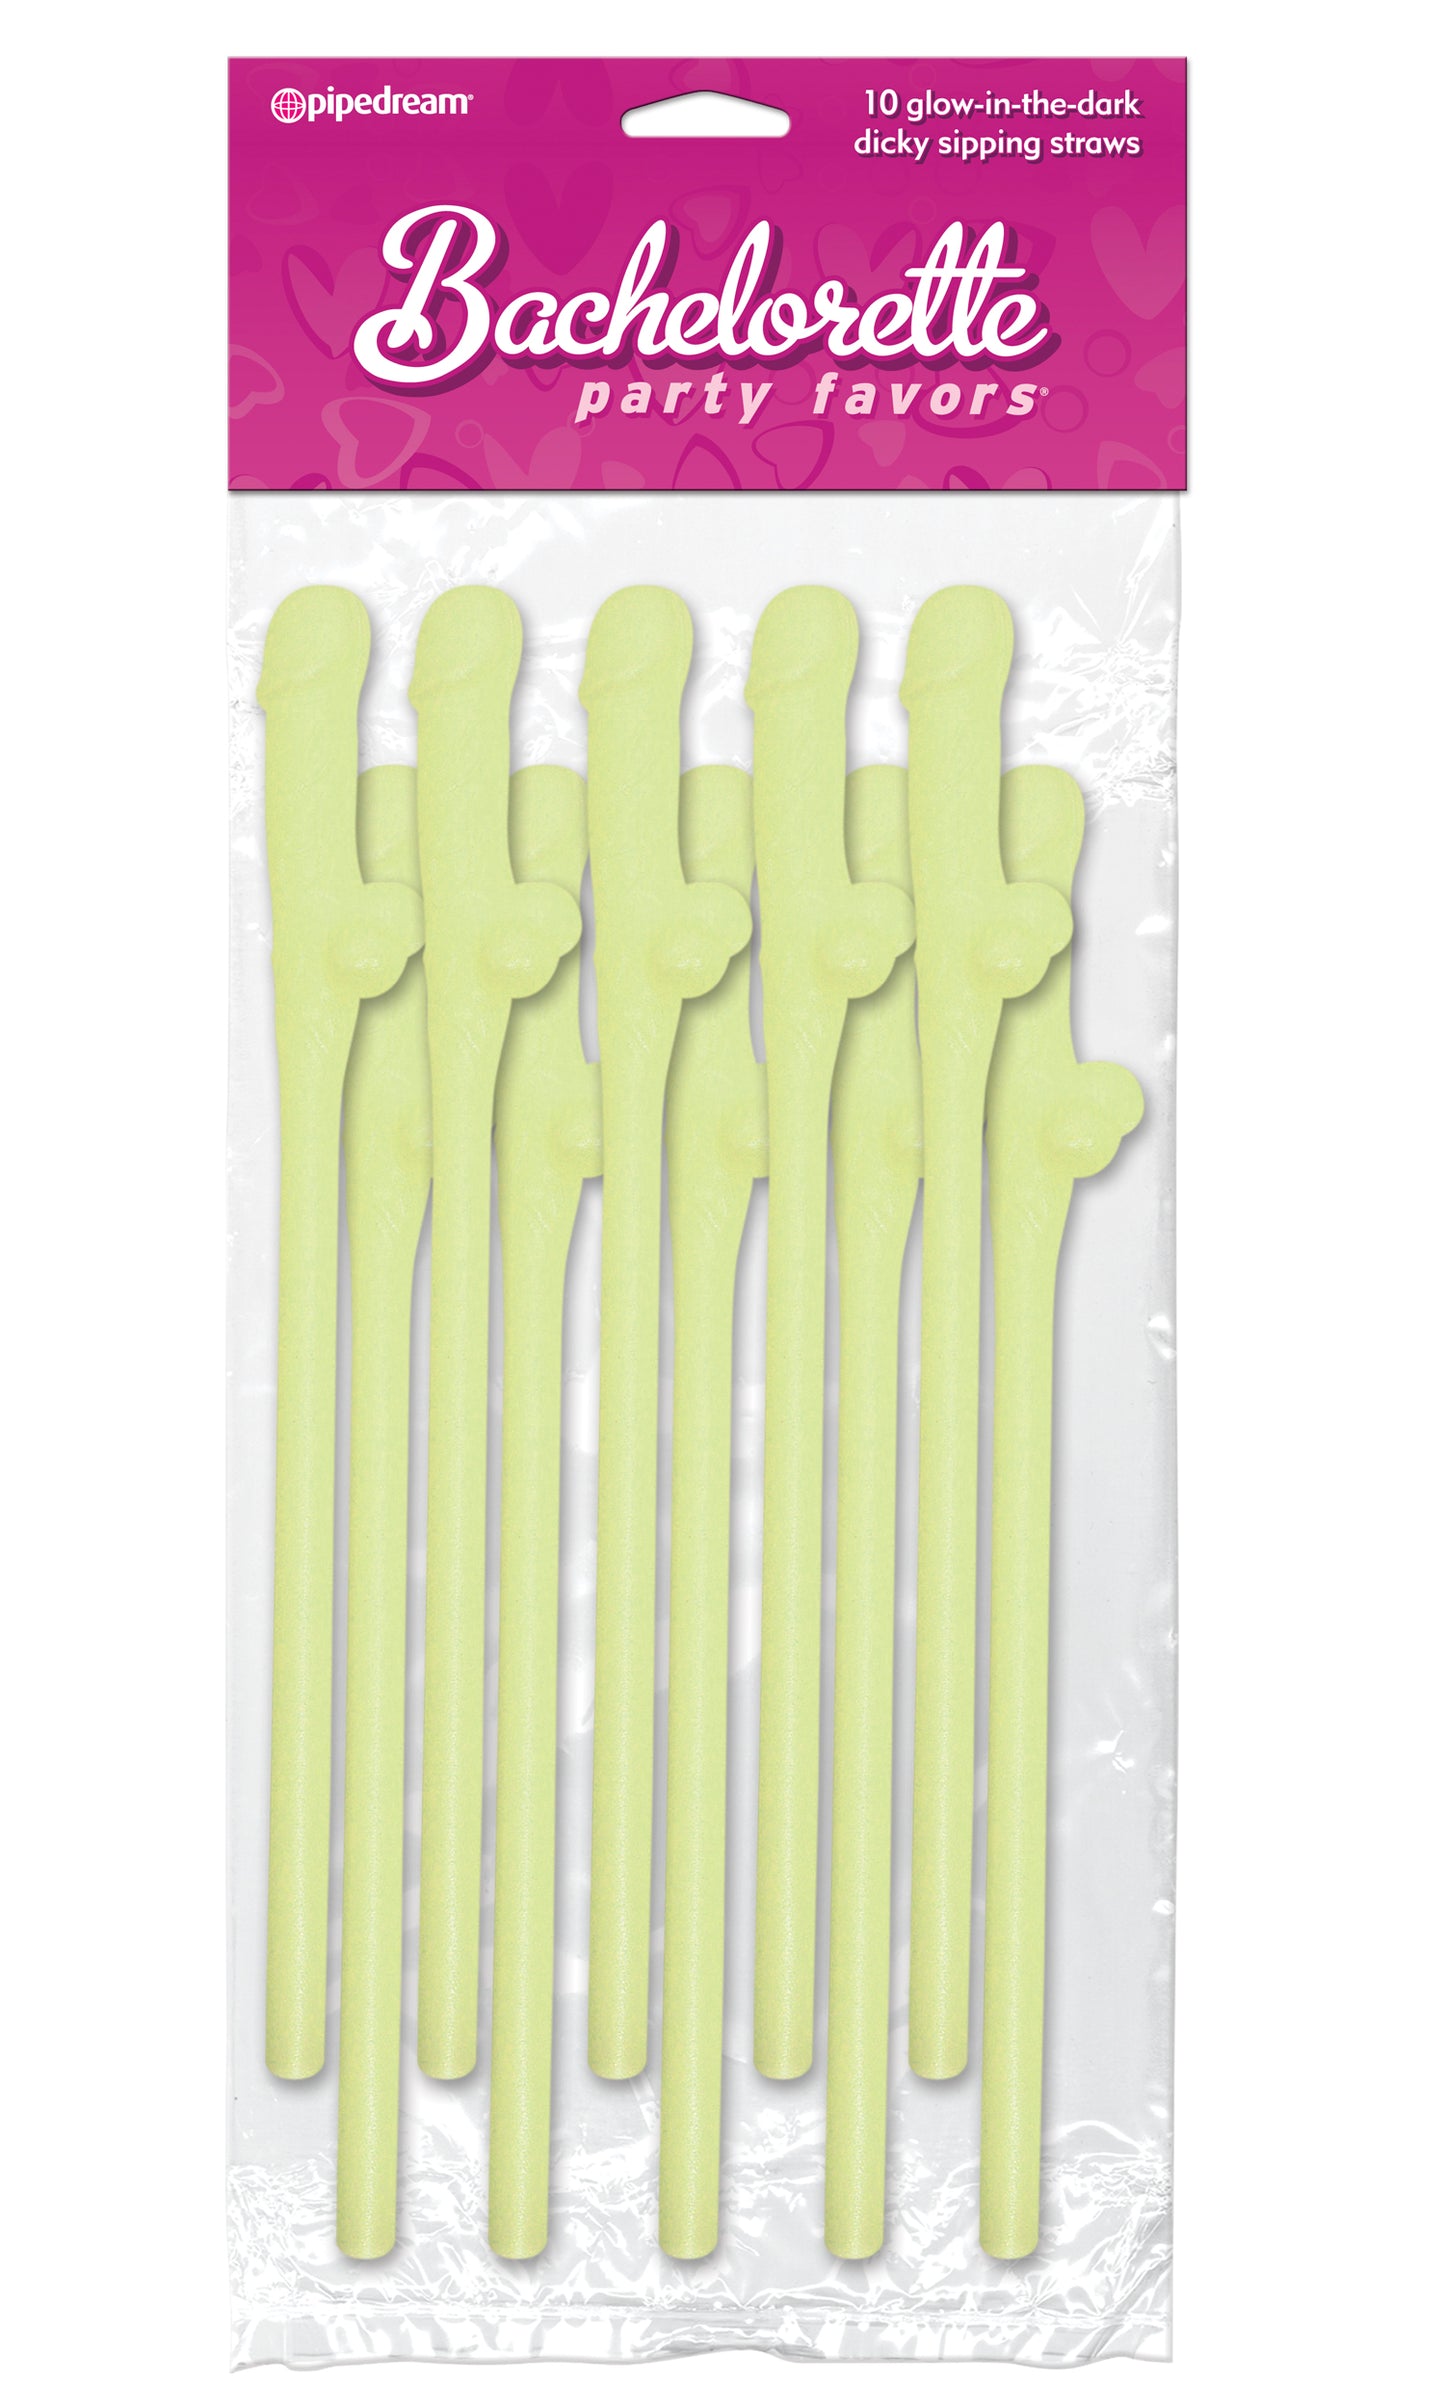 Bachelorette Party Favors - Dicky Sipping Straws - Glow-in-the-Dark -